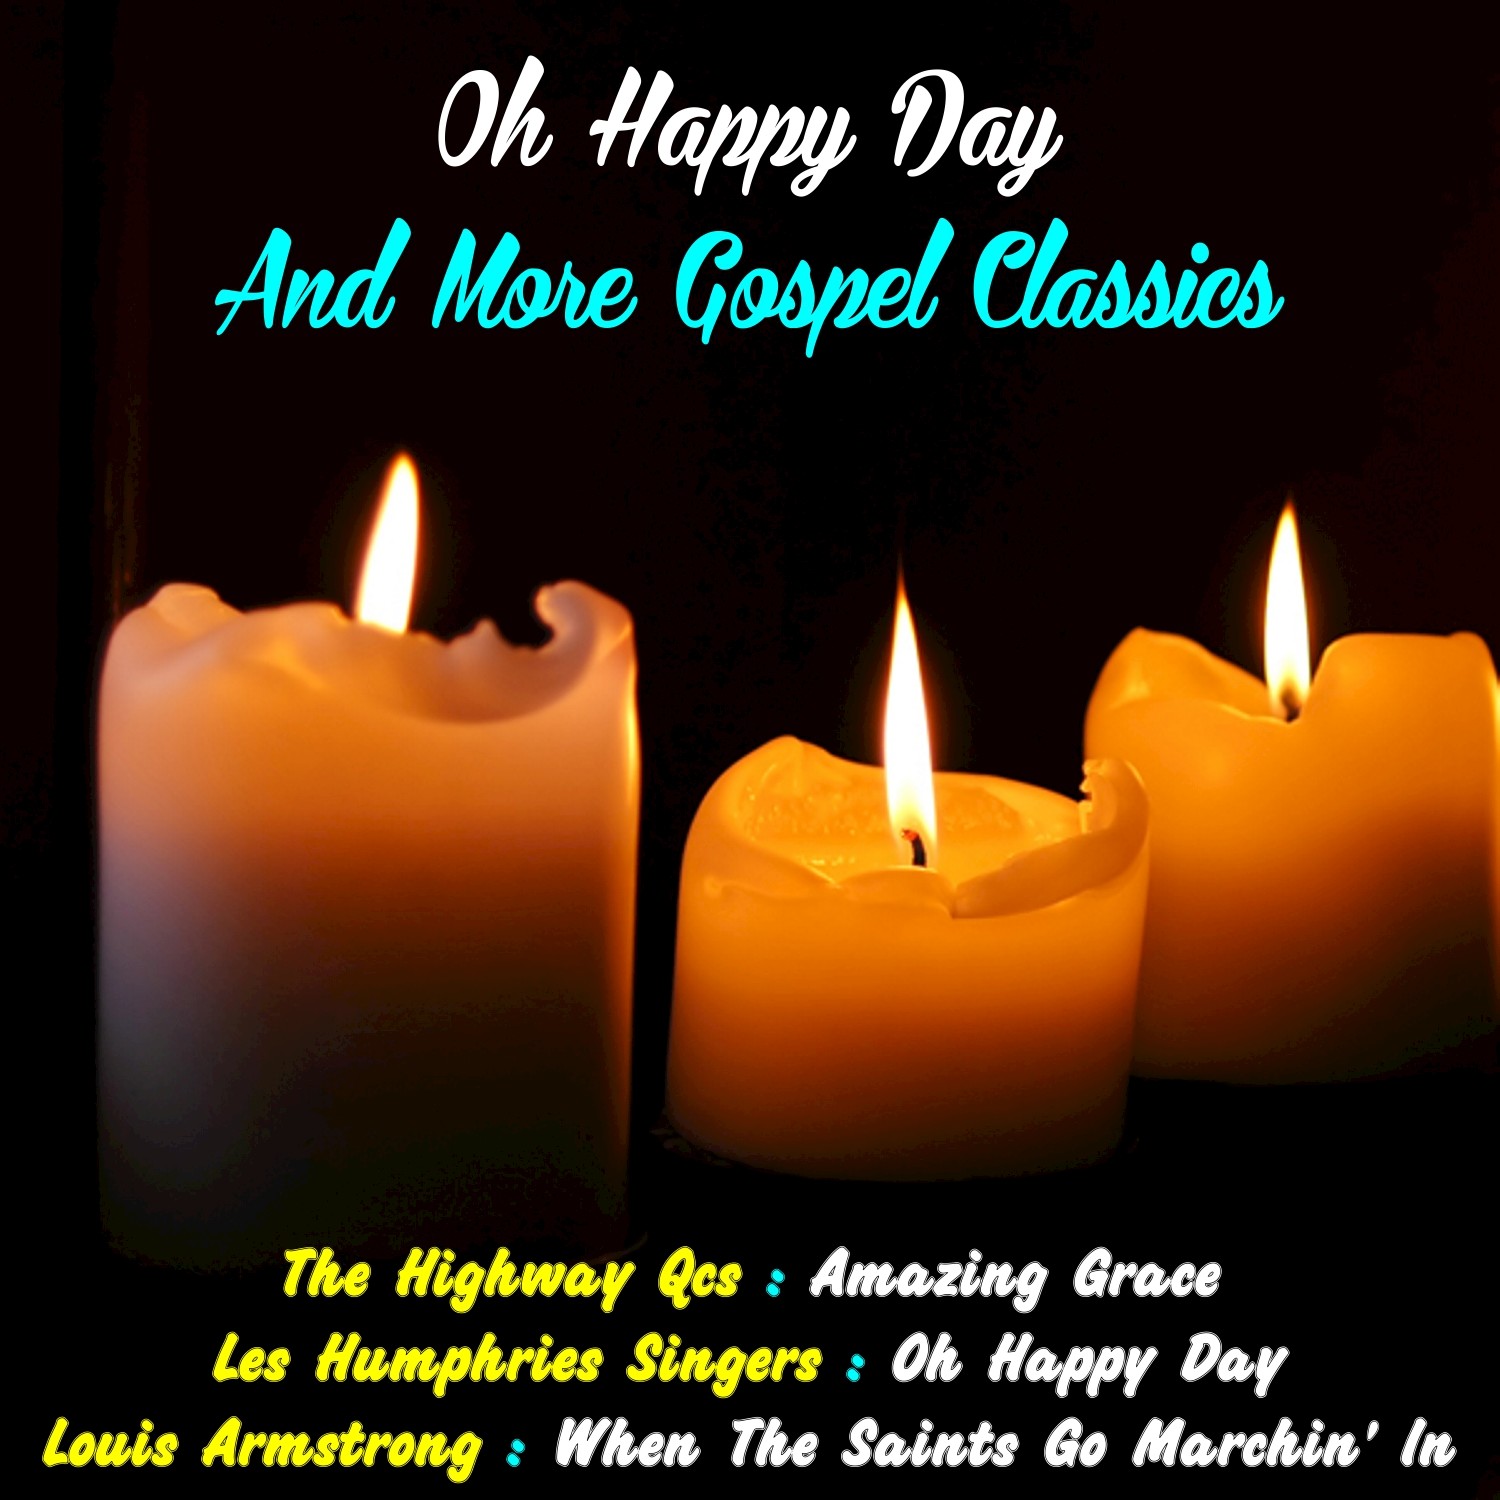 Oh Happy Day and More Gospel Classics